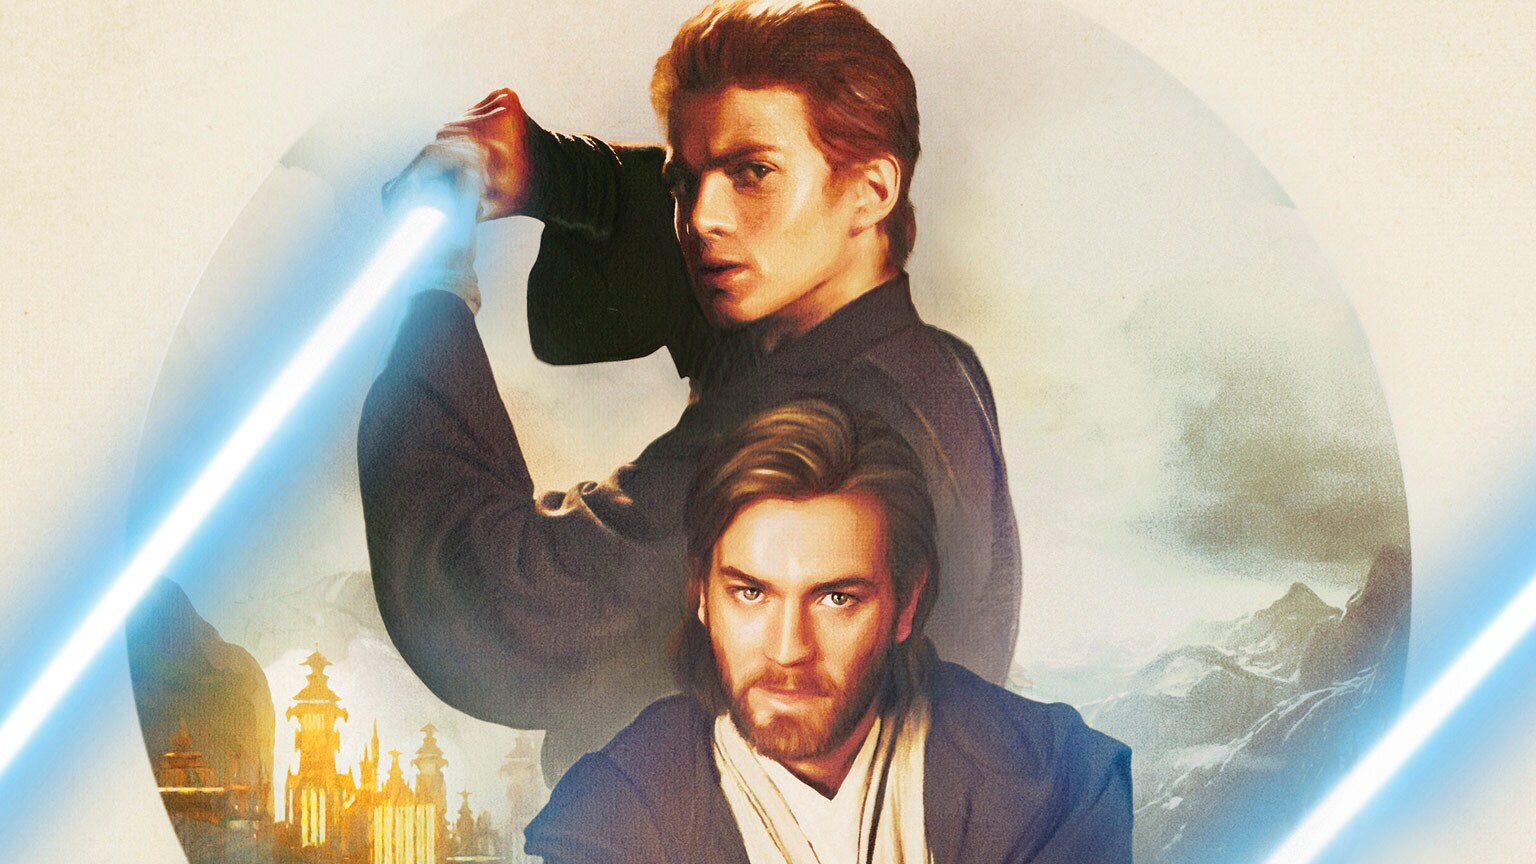 Anakin and Obi-Wan Are Ready for Battle on the Cover of Star Wars: Brotherhood - Exclusive Reveal